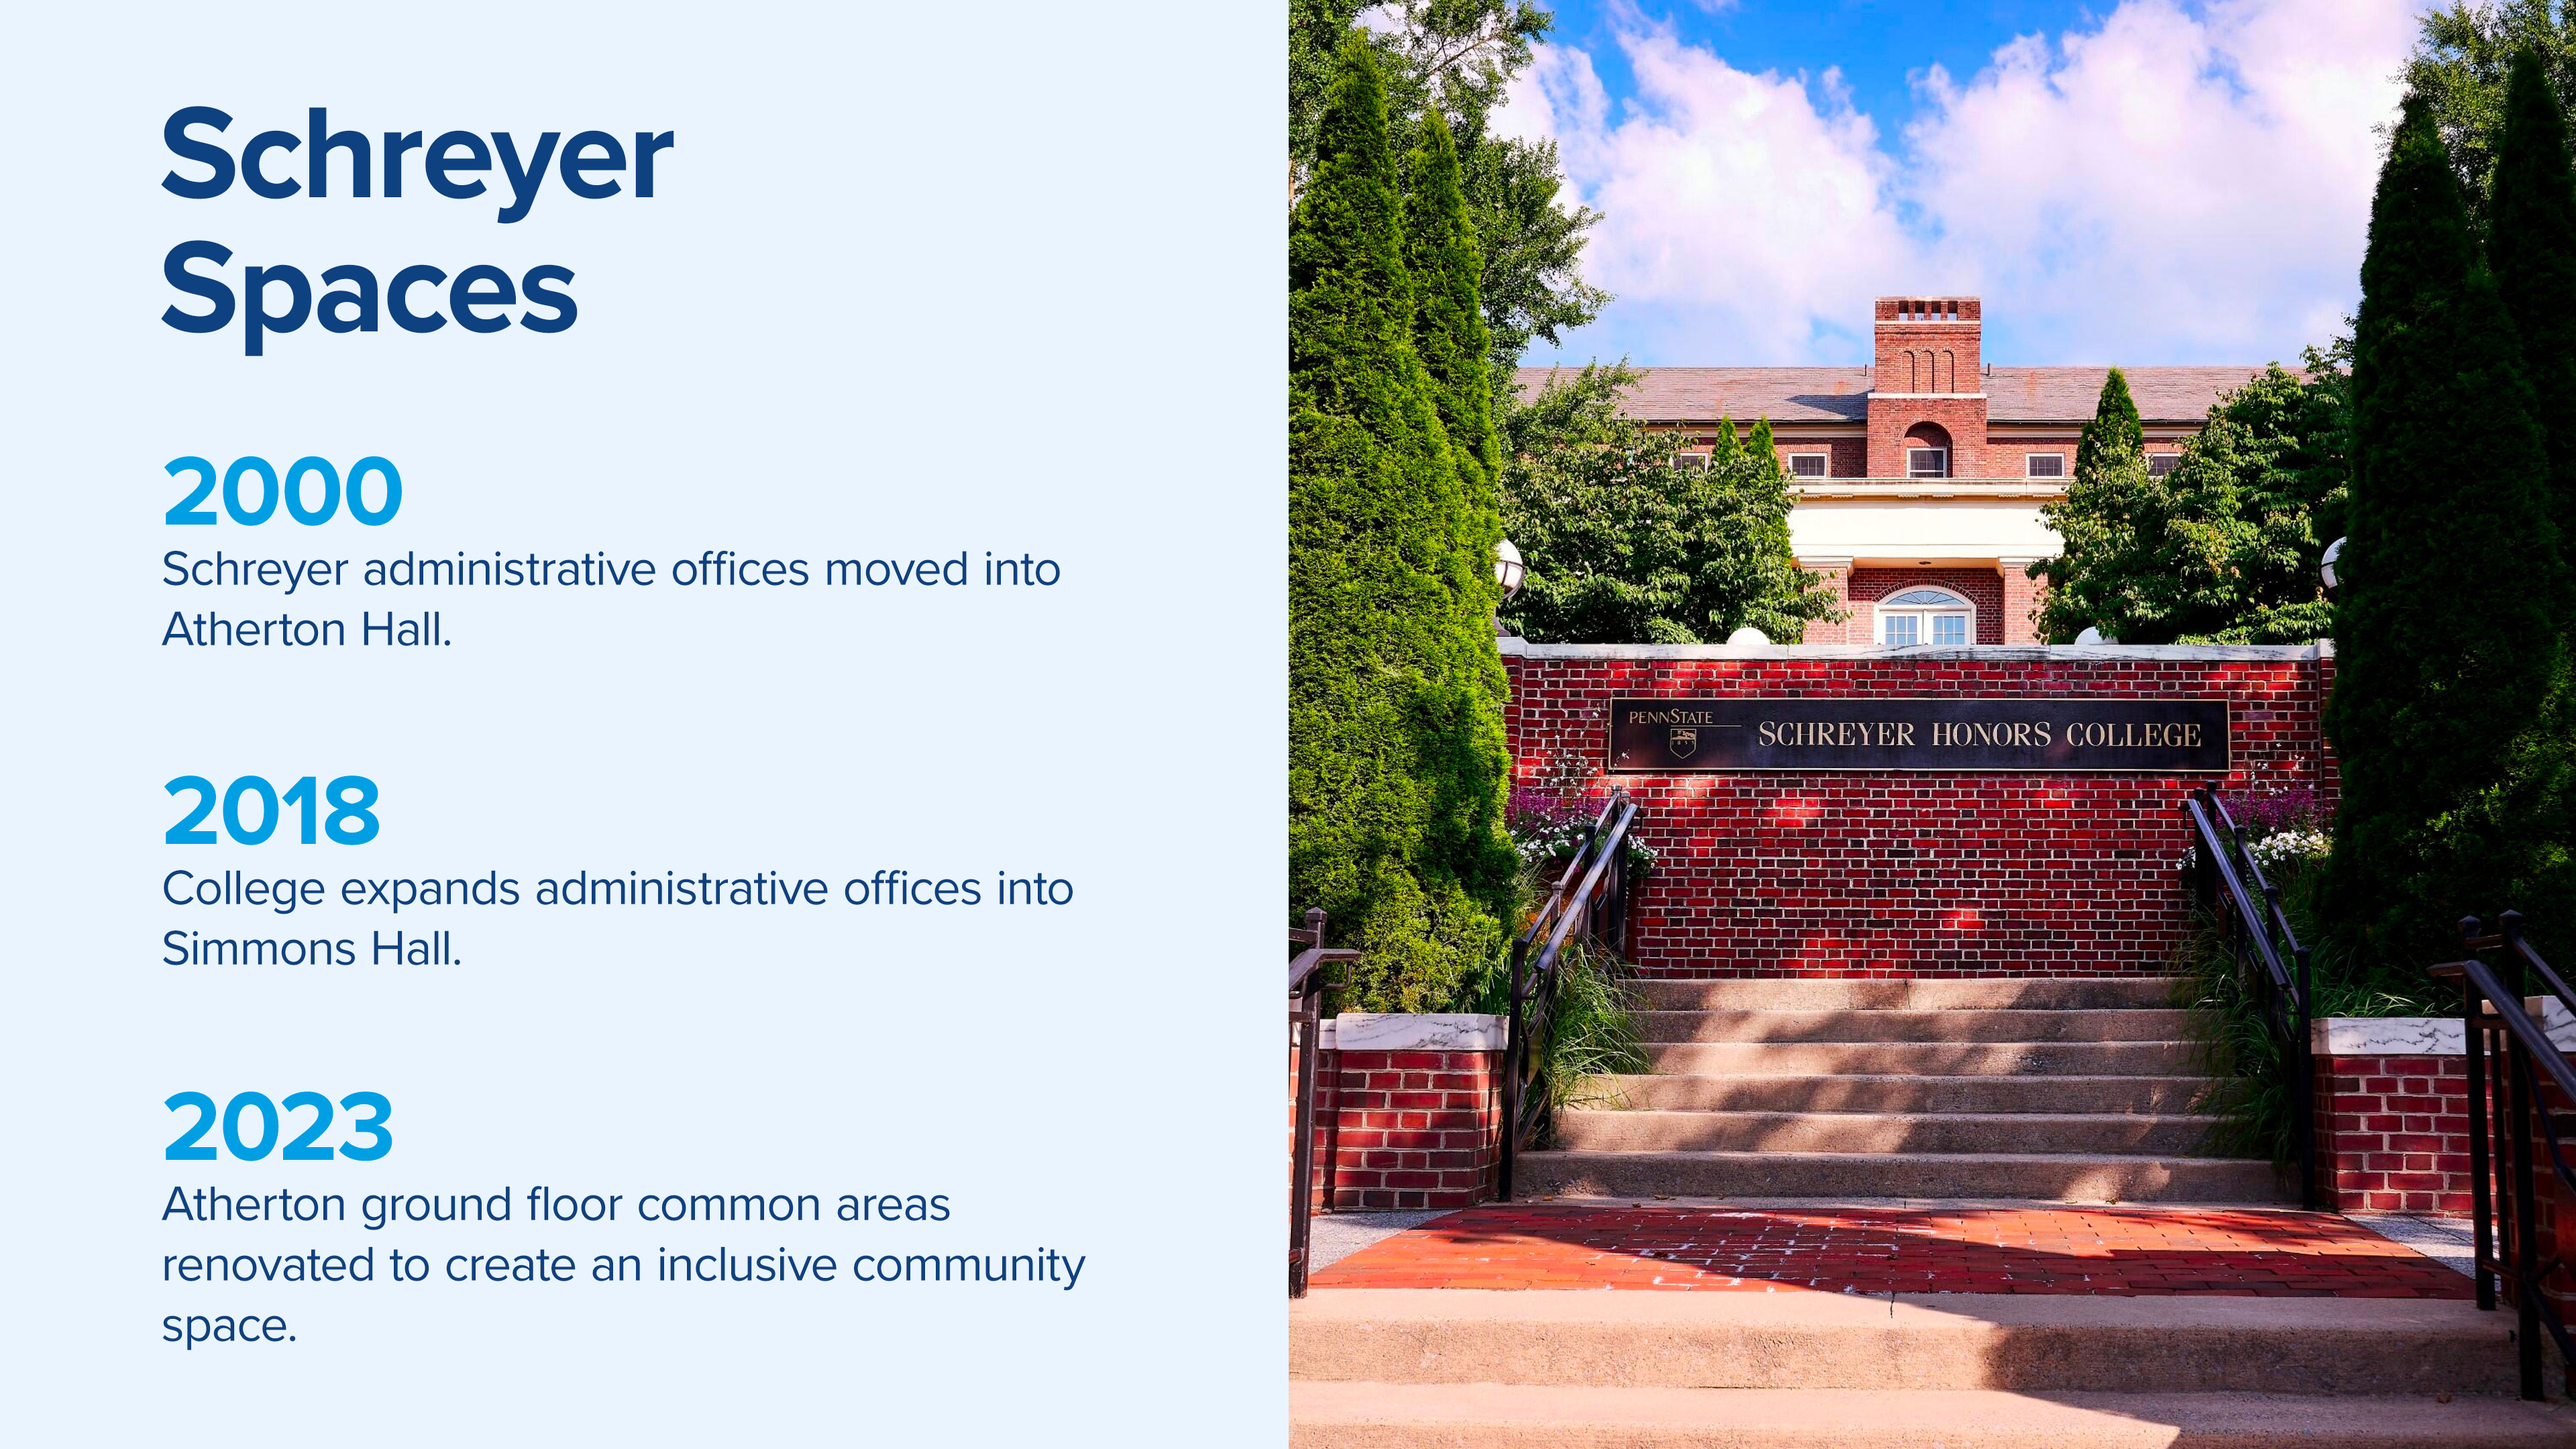 Schreyer Honors College physical spaces and locations over the years